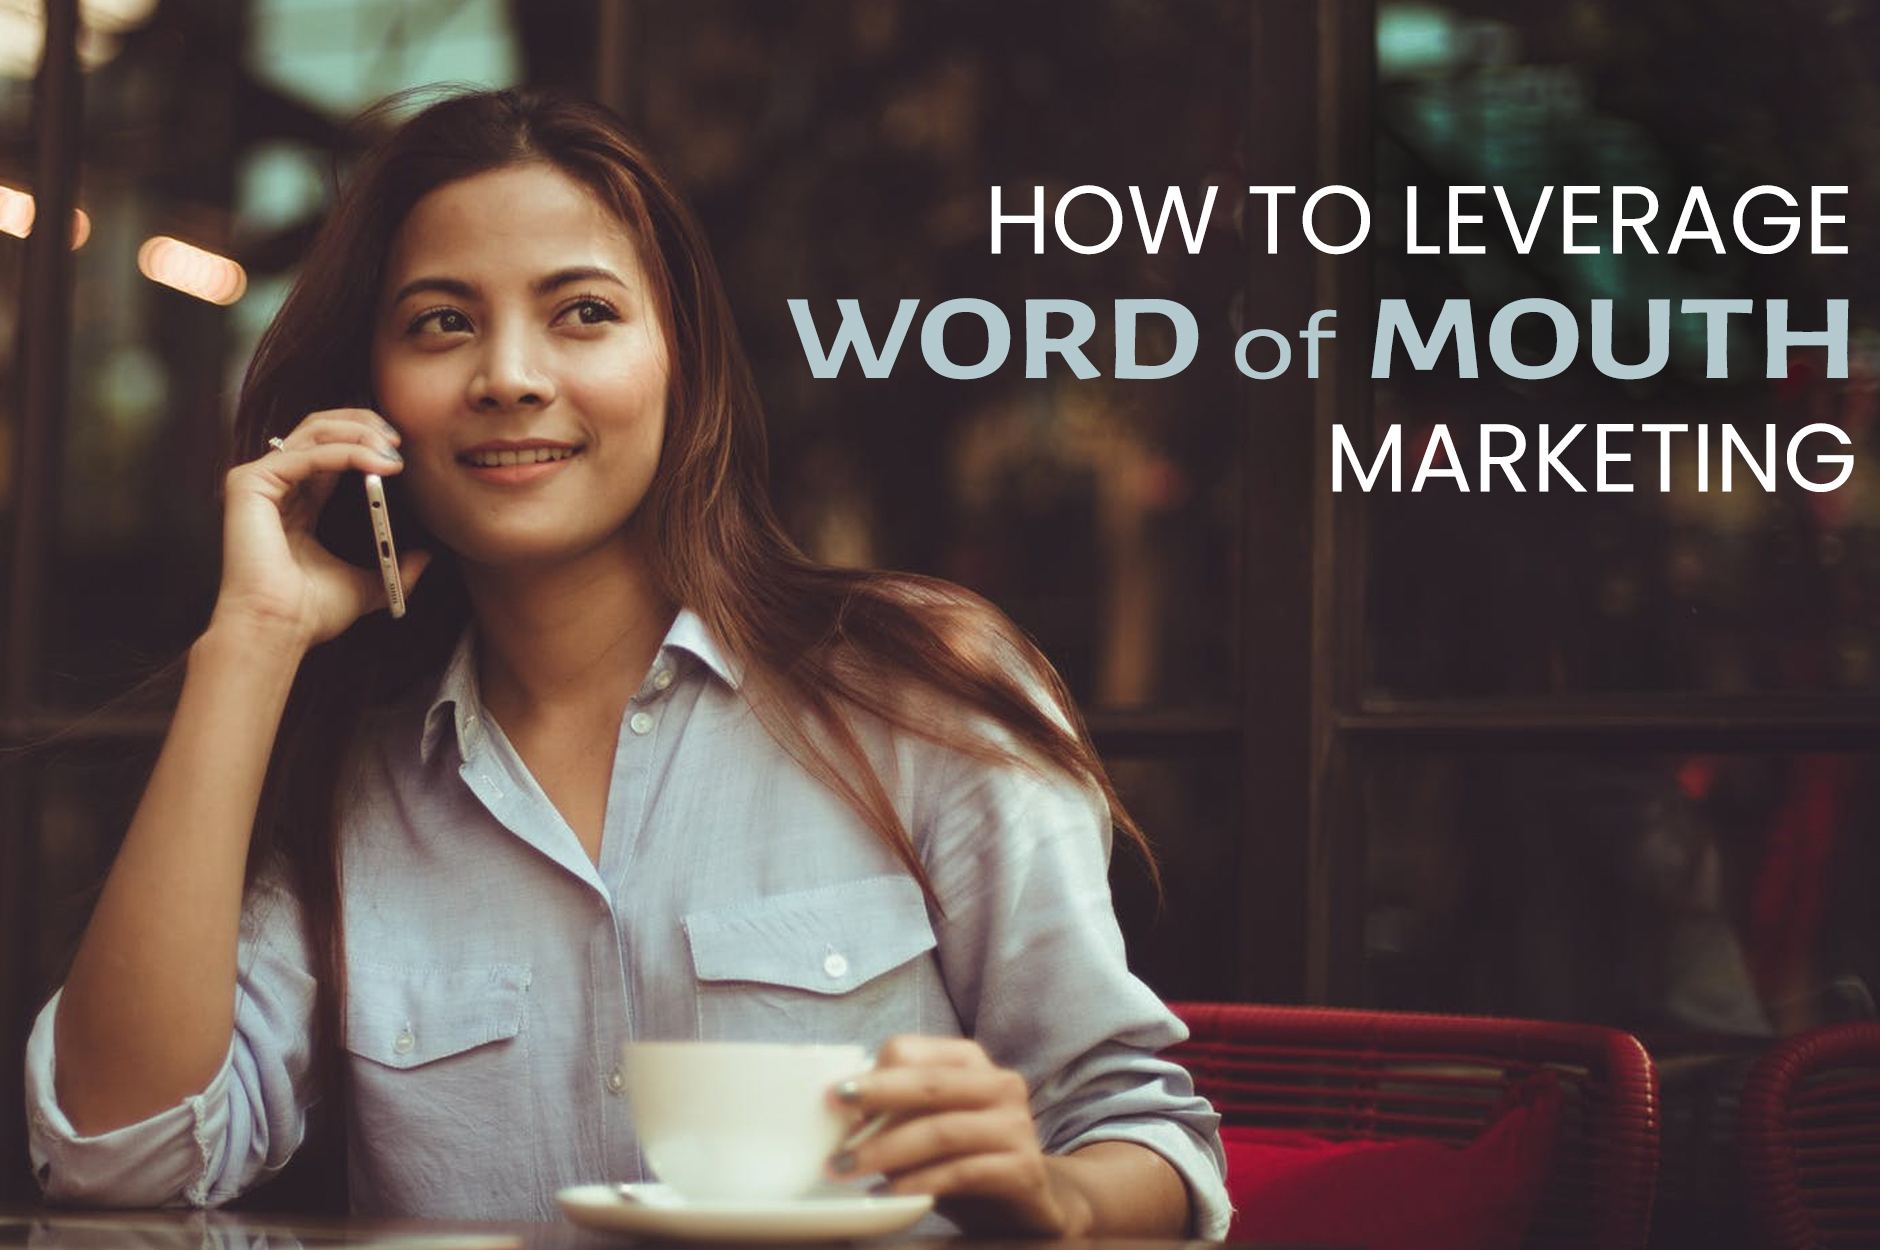 Restaurant Marketing: The Power of Word of Mouth